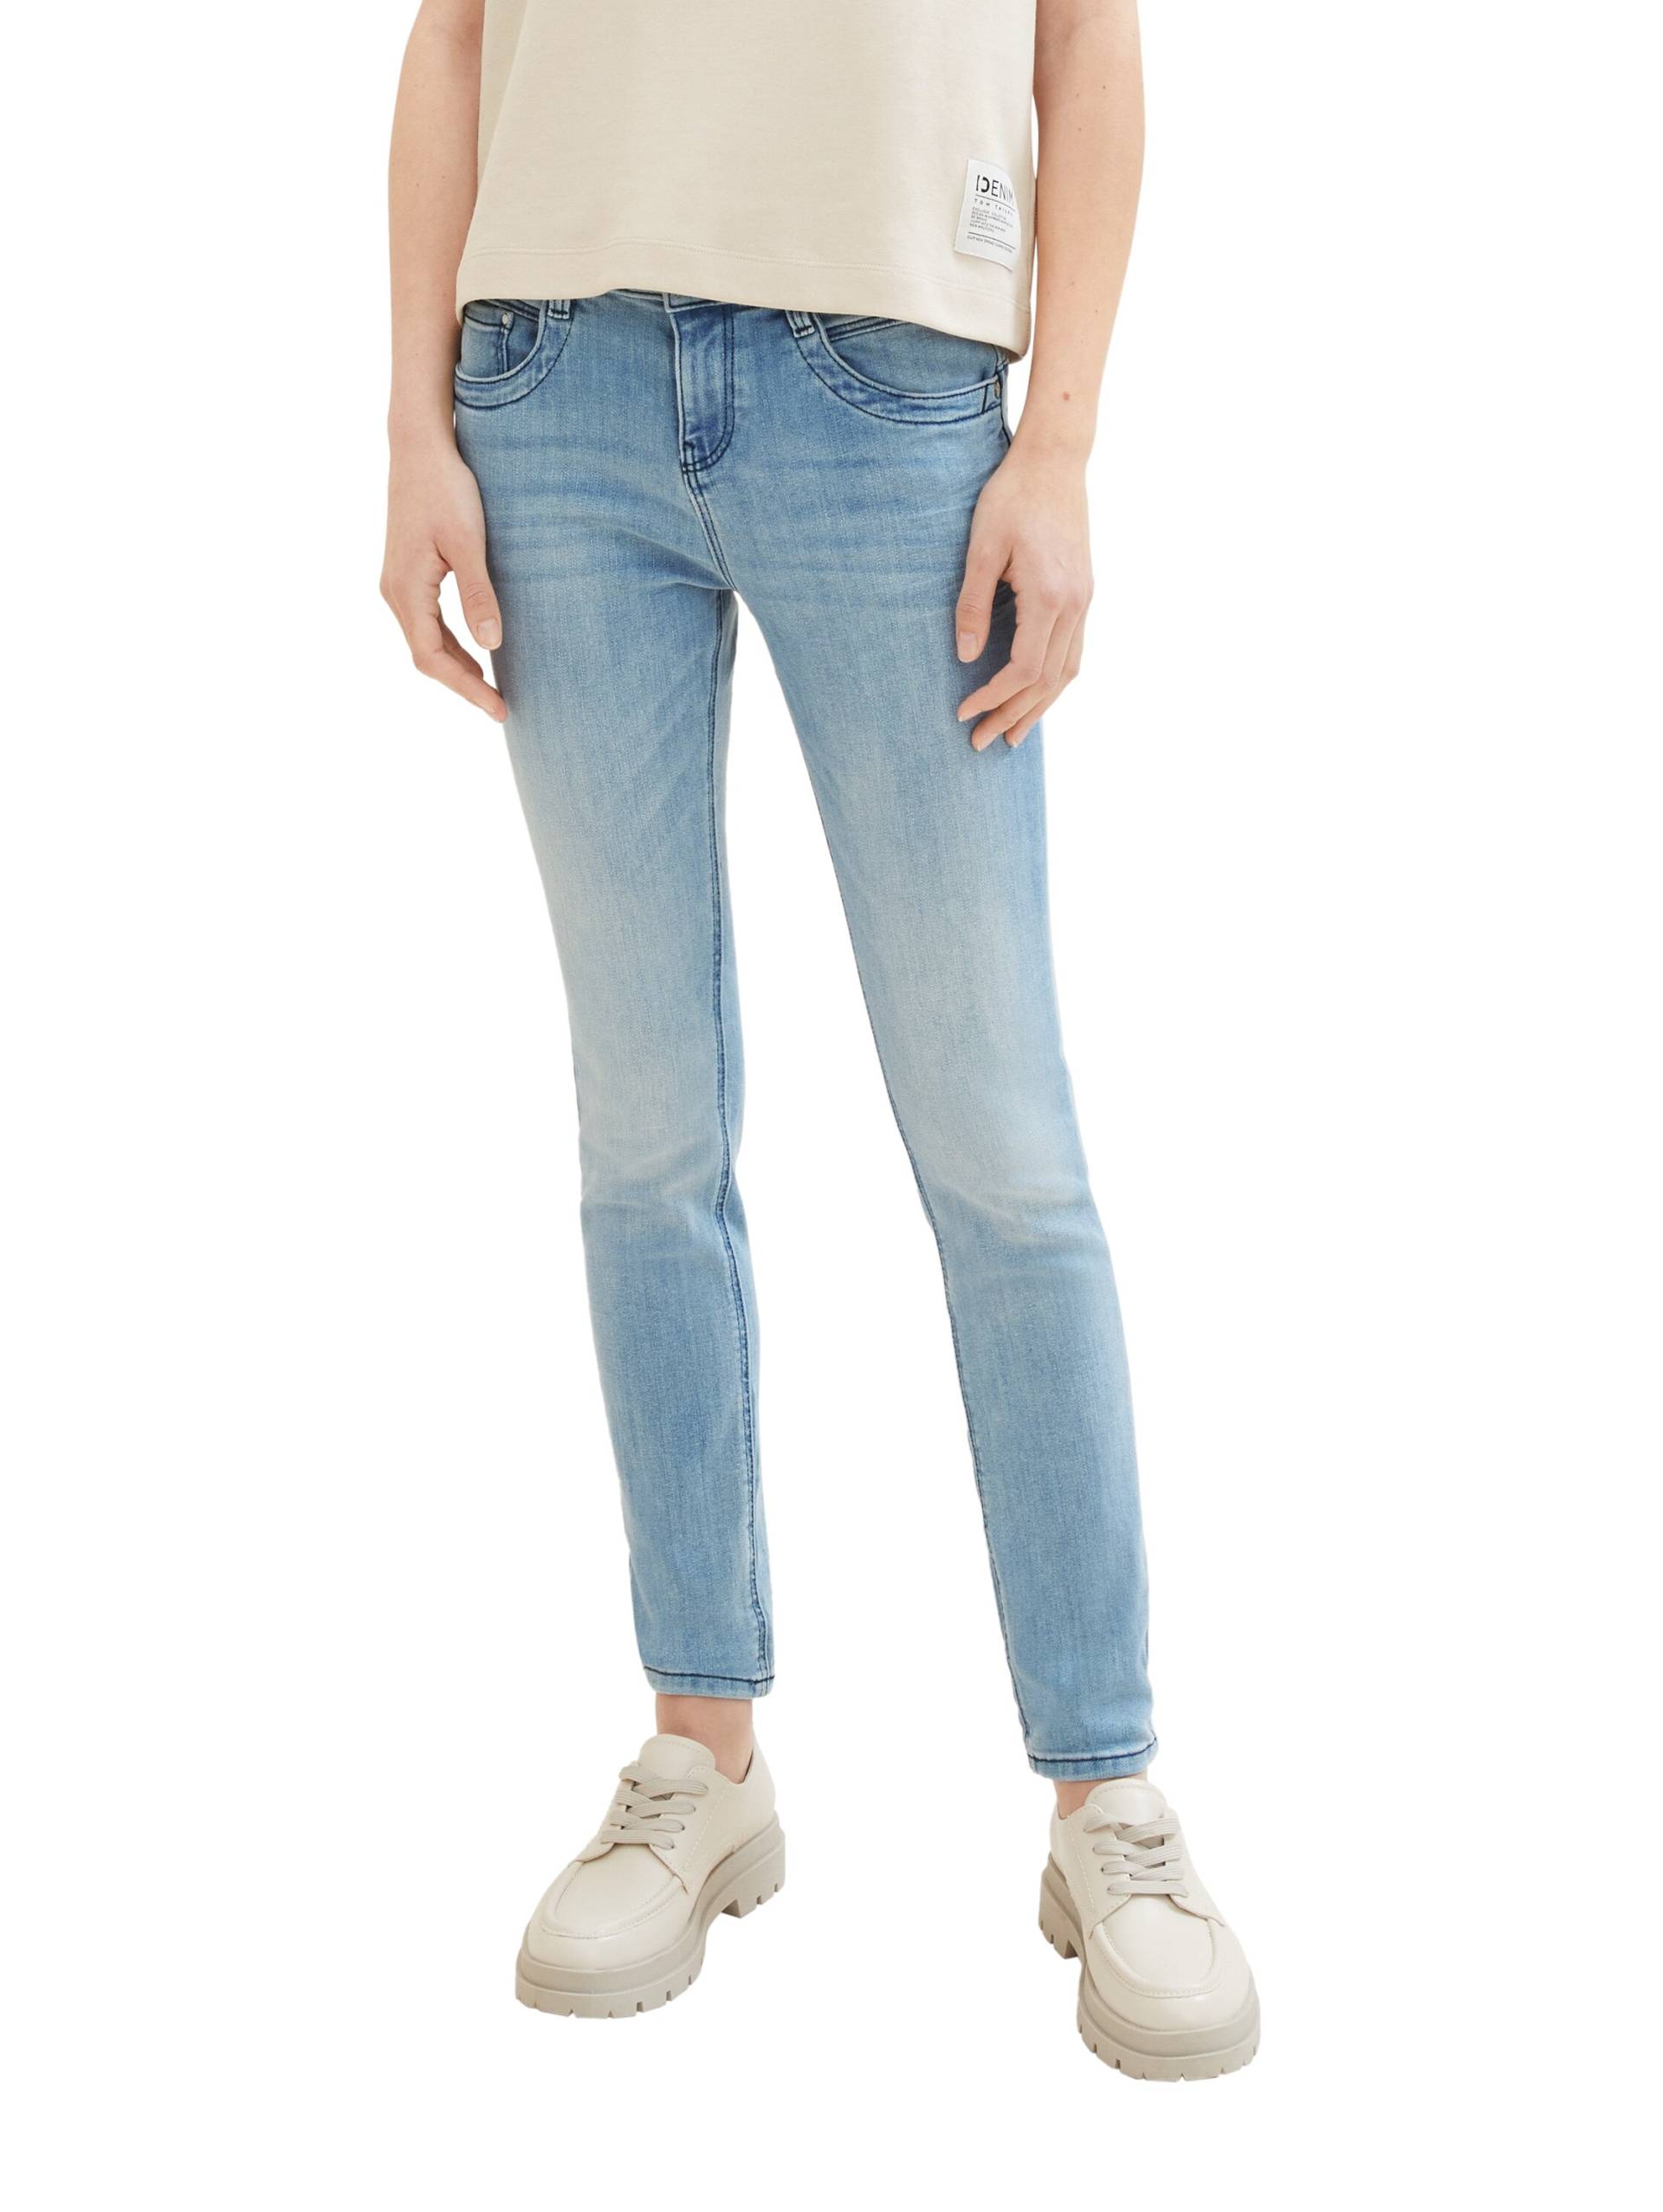 TOM TAILOR 5-Pocket-Jeans »Tapered Relaxed« von Tom Tailor